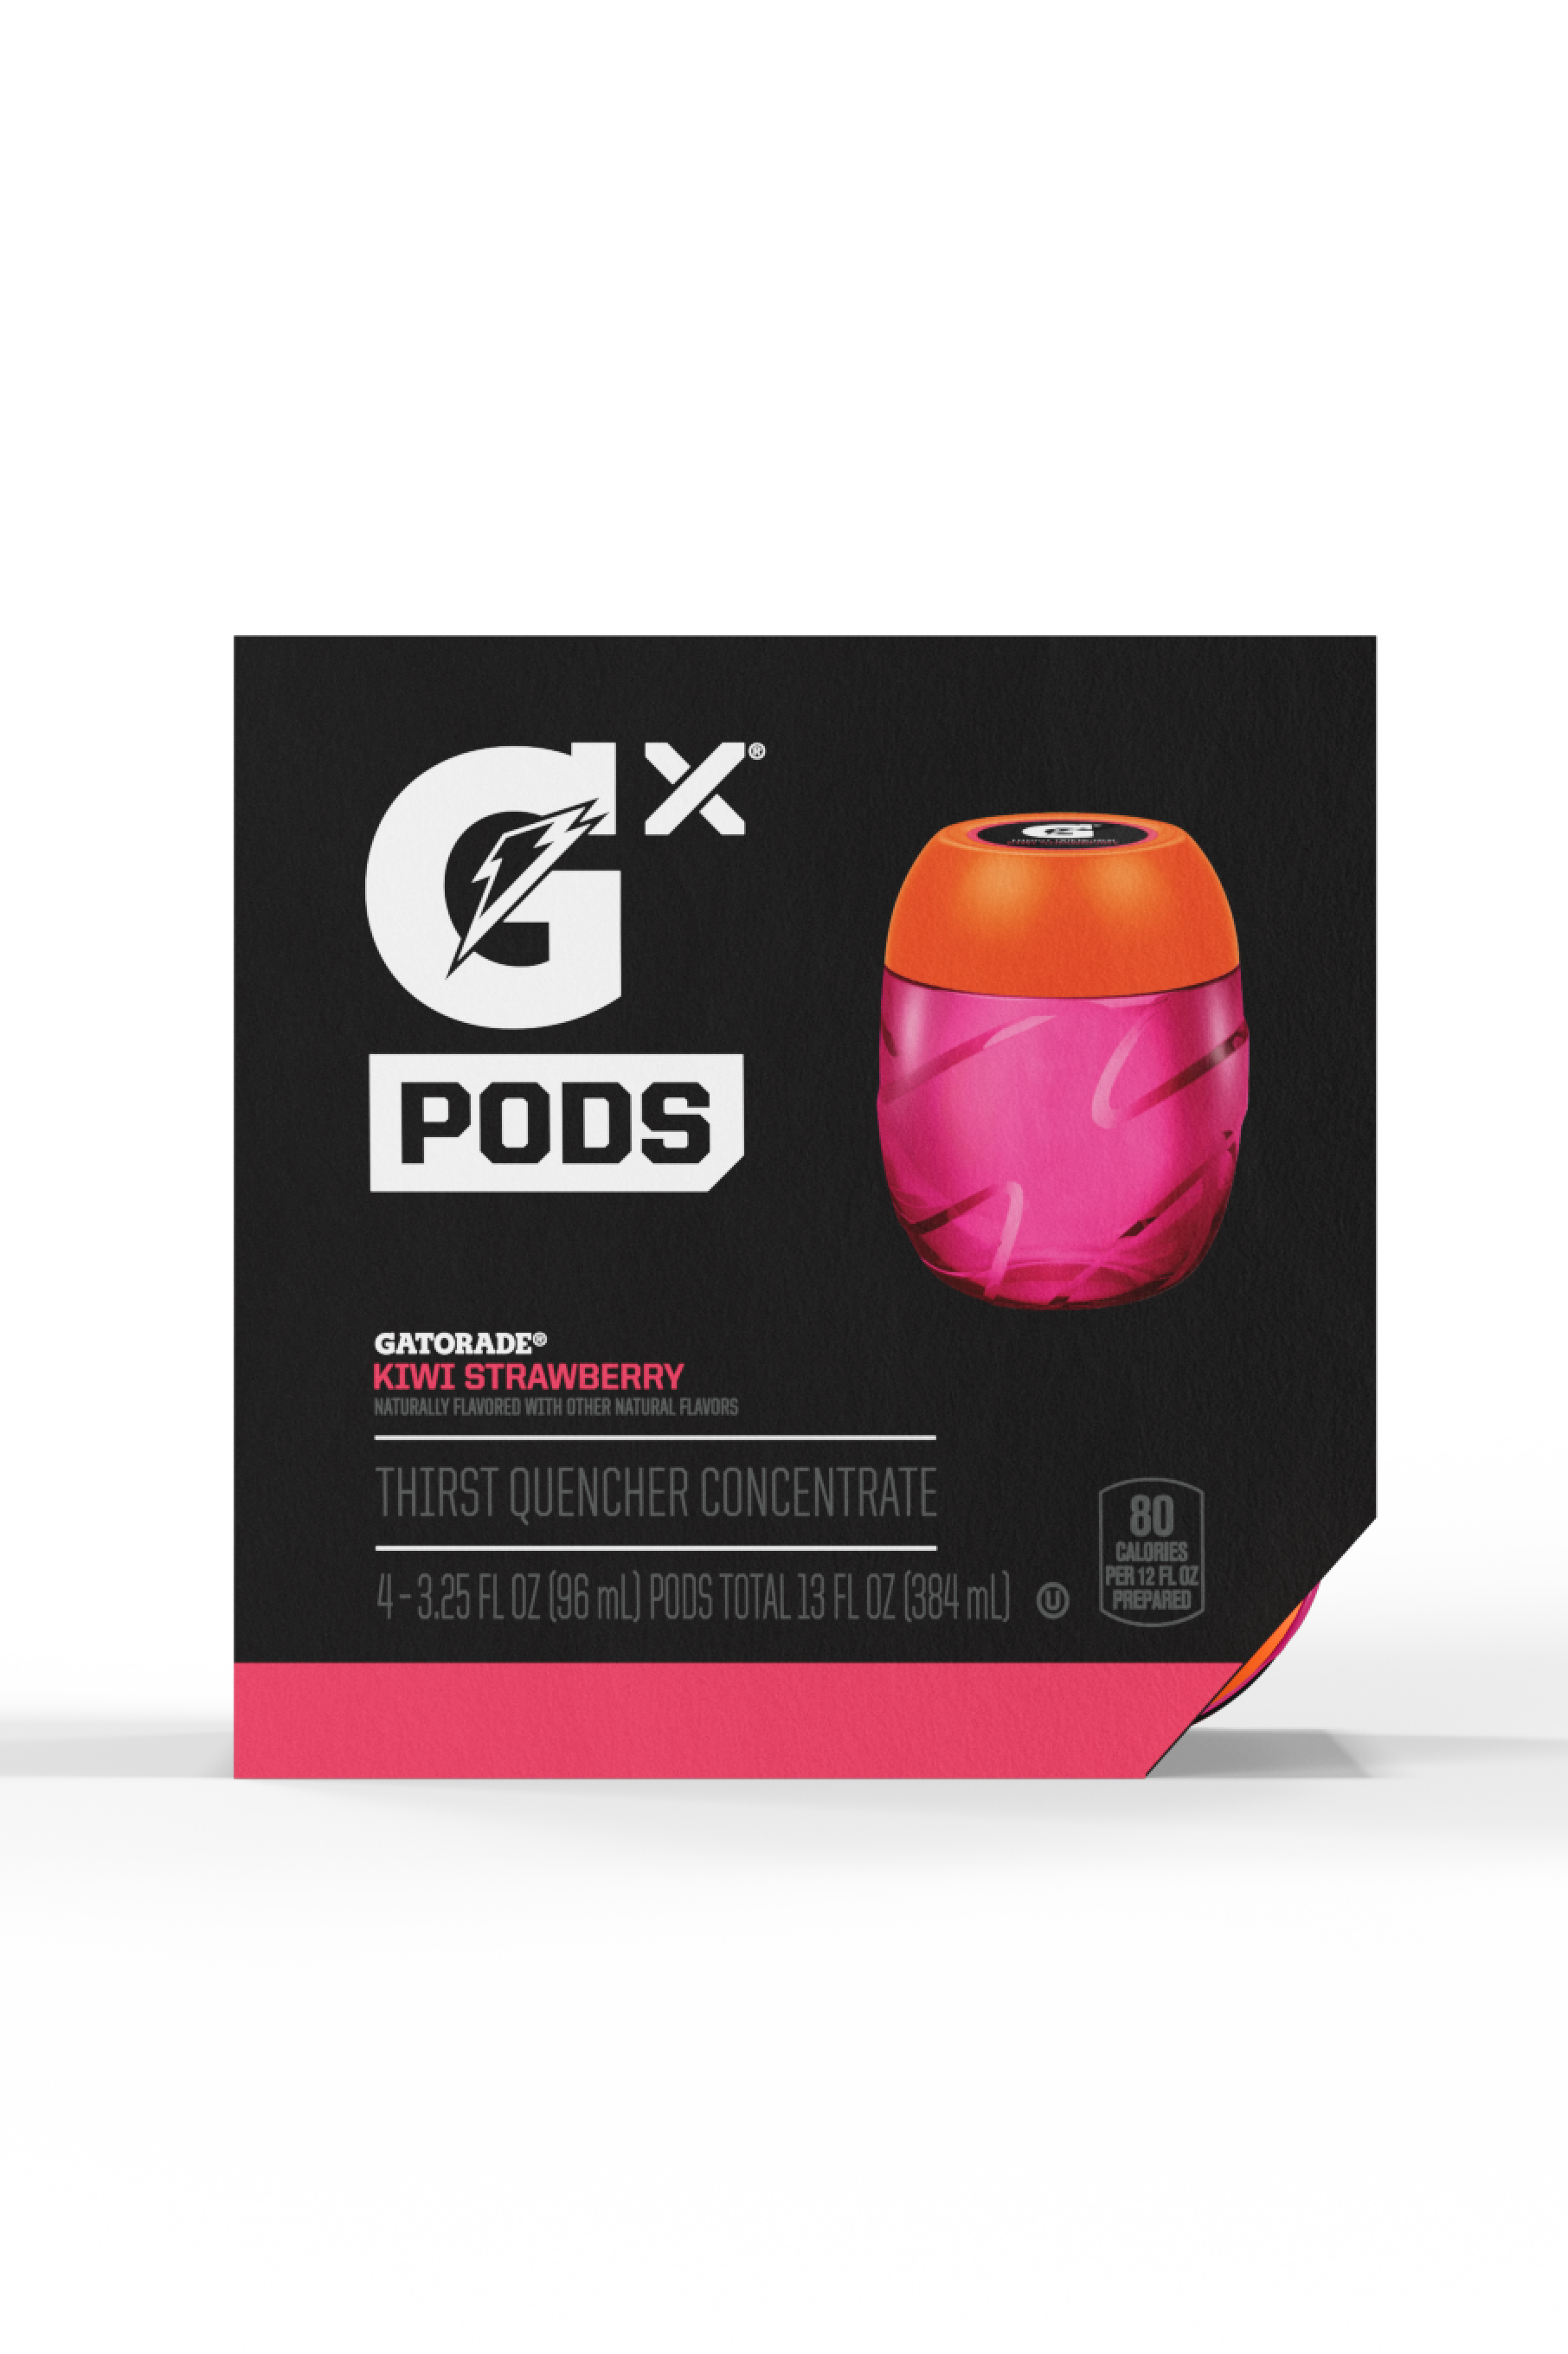 Four pods are in each package